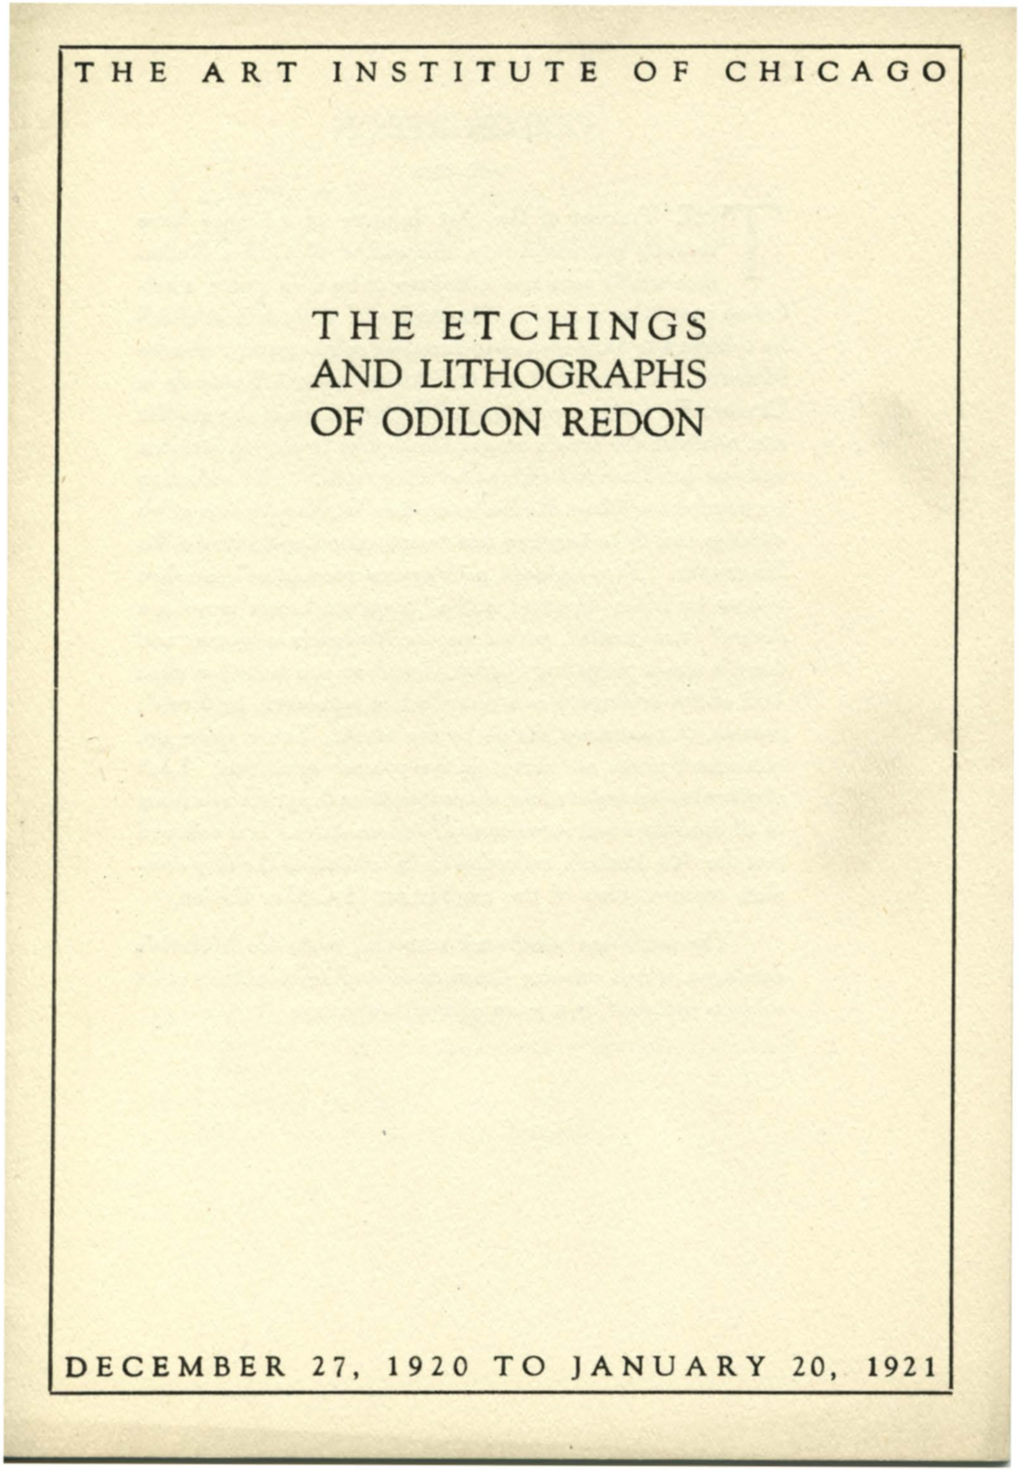 The Etchings and Lithographs of Odilon Redon